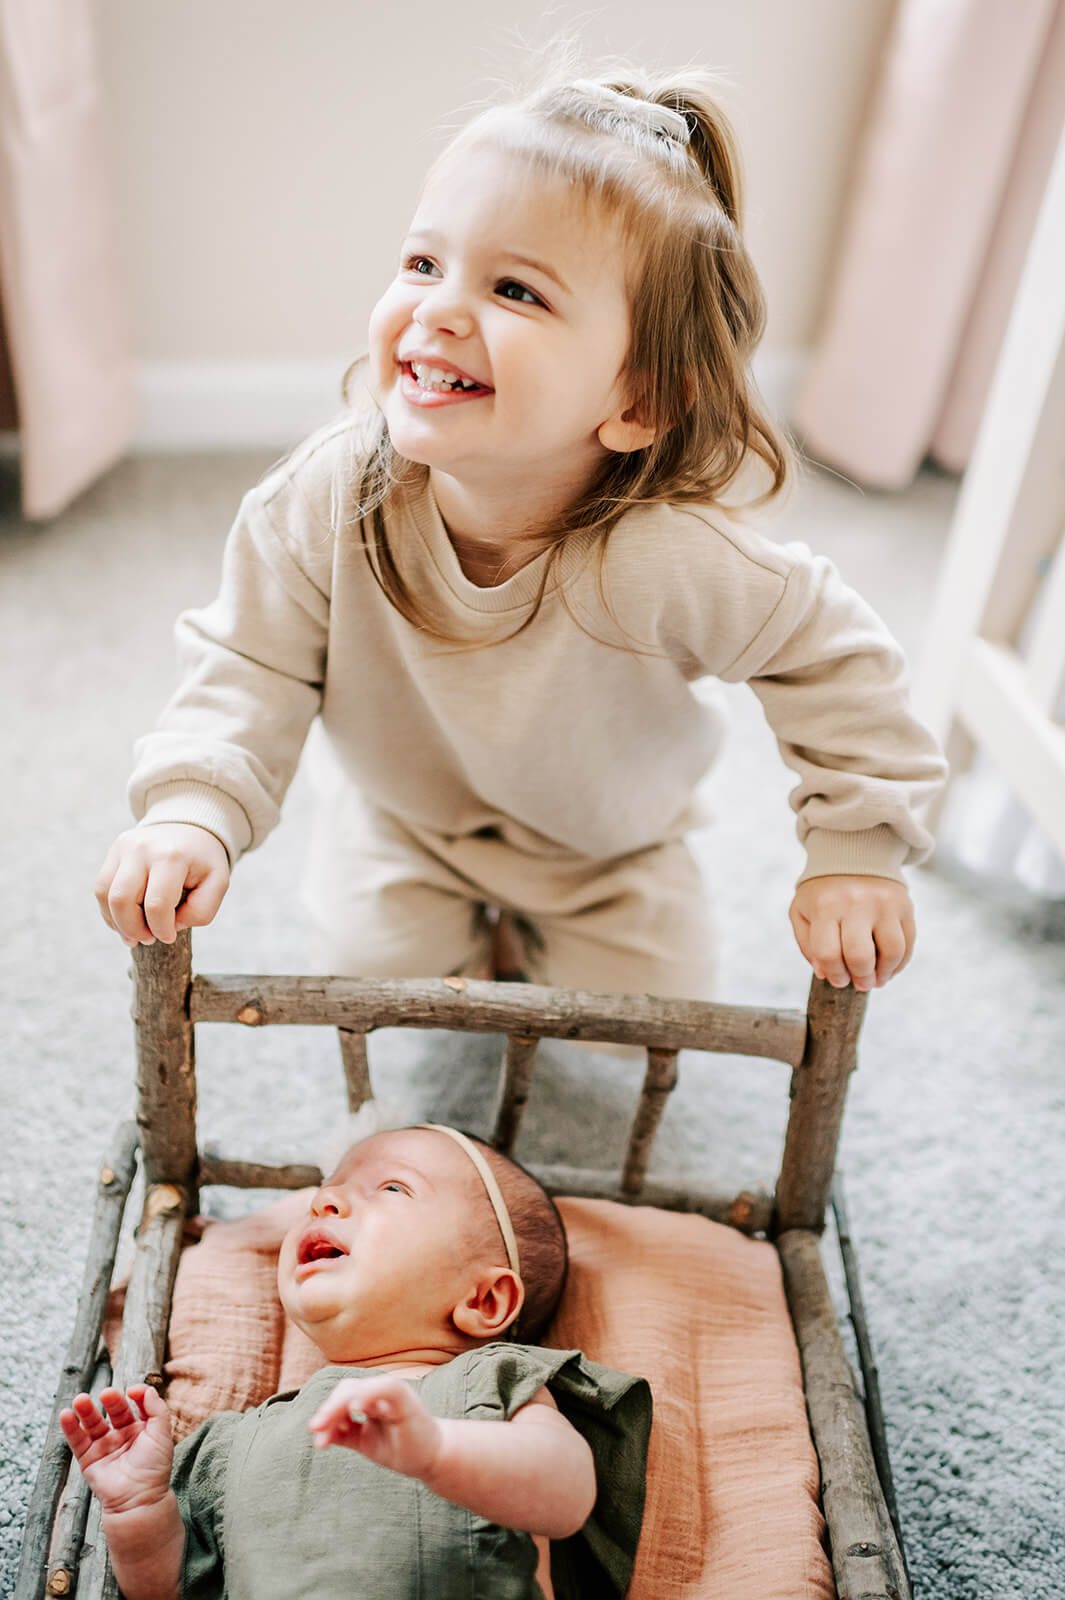 A toddler girl in a tan sweater smiles overtop her newborn baby sister laying in a wooden stick bed in a nursery after visiting shower me with love charlotte